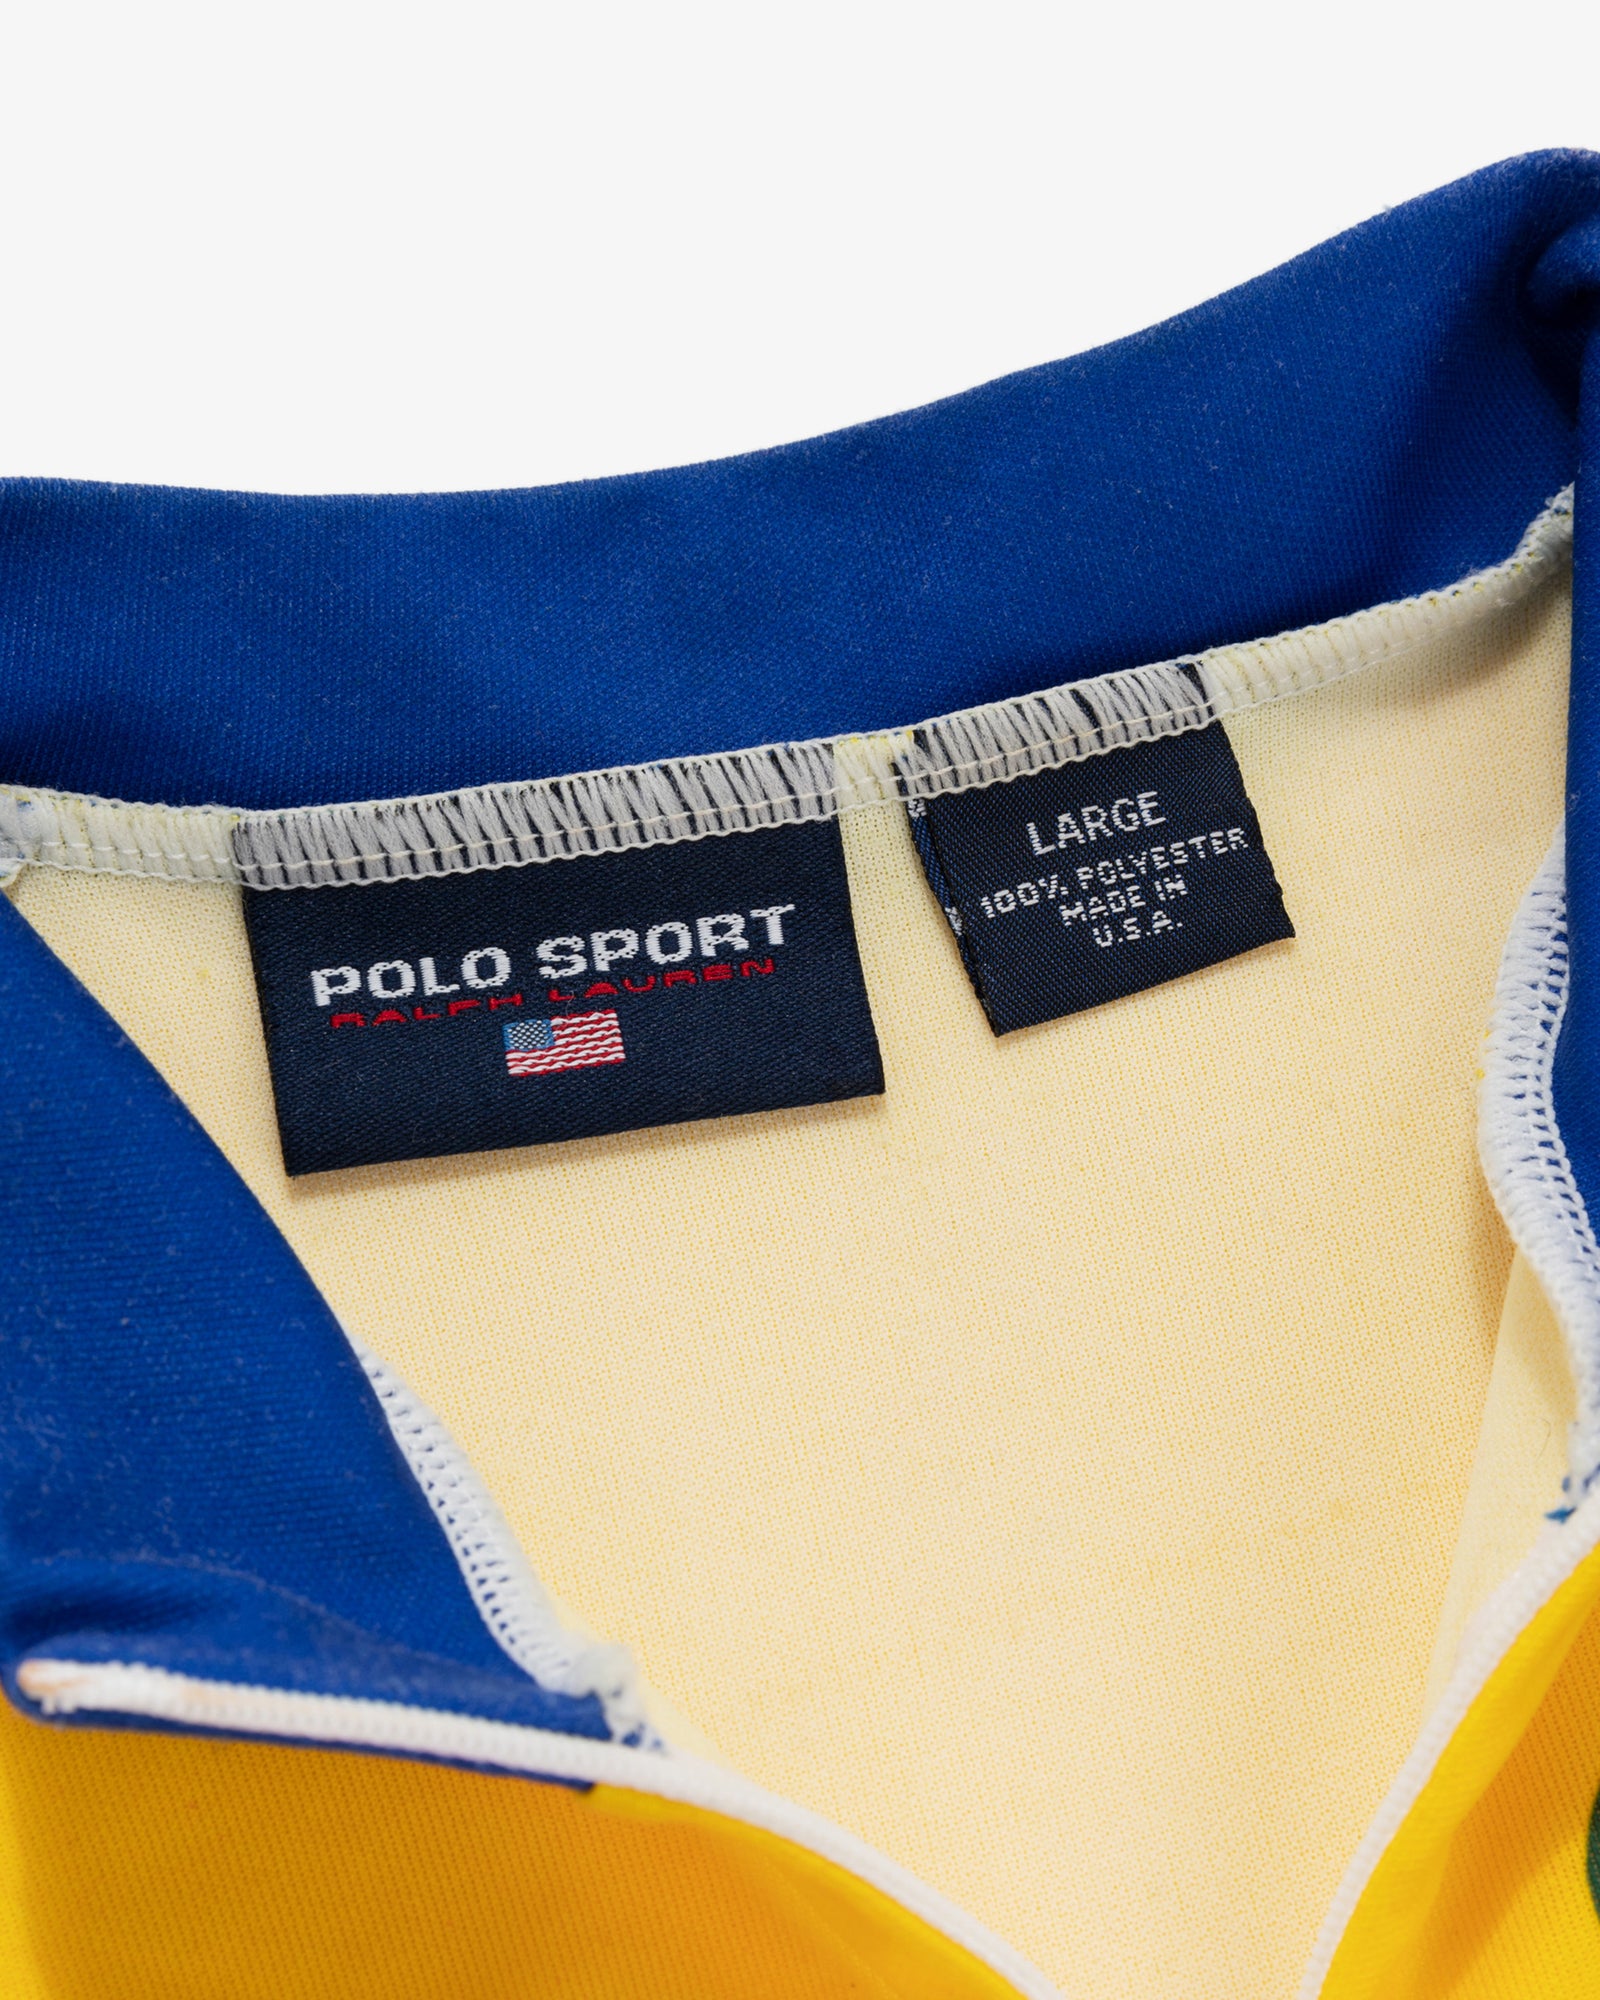 Vintage Polo Sport Cycling Jersey at